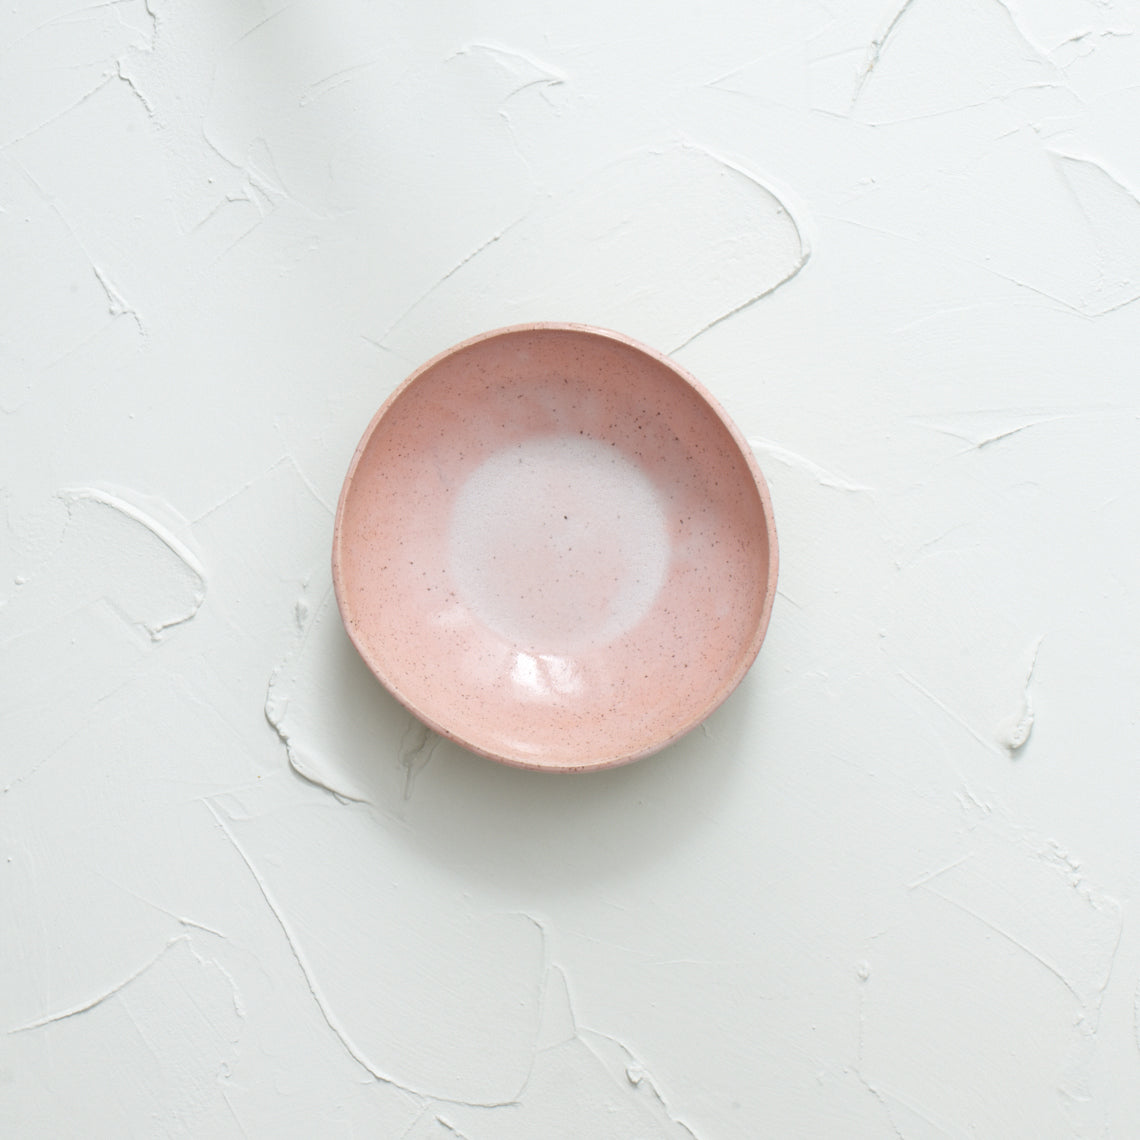 Icy Pink Bowl 2